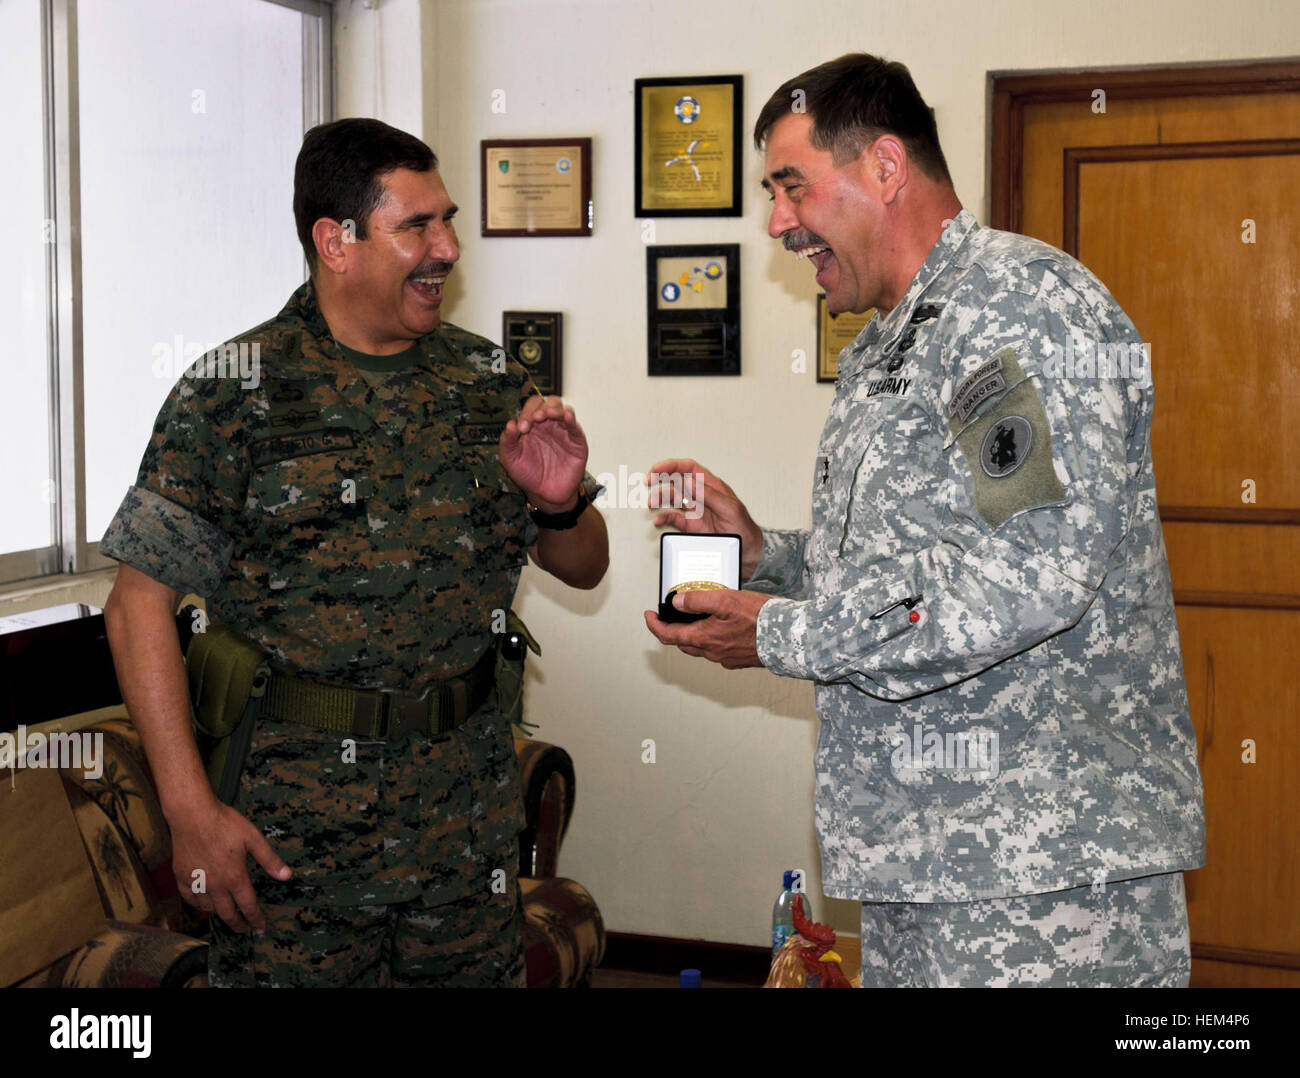 U.S. Army Maj. Gen. Simeon Trombitas, commander of U.S. Army South, right, laughs with Guatemalan Minister of Defense Ulises Anzueto after exchanging gifts at Wednesday's Beyond the Horizon Guatemala 2012 (BTH) opening ceremony.  BTH is an U.S. Army South-led joint foreign military exercise deploying U.S. military engineers and medical professionals focused on providing medical and dental care and engineering support to local populations.  (Photo by Spc. Anthony D. Jones) Missouri Guardsmen kick off humanitarian mission with opening ceremonies in Honduras and Guatemala 120418-A-YF985-163 Stock Photo